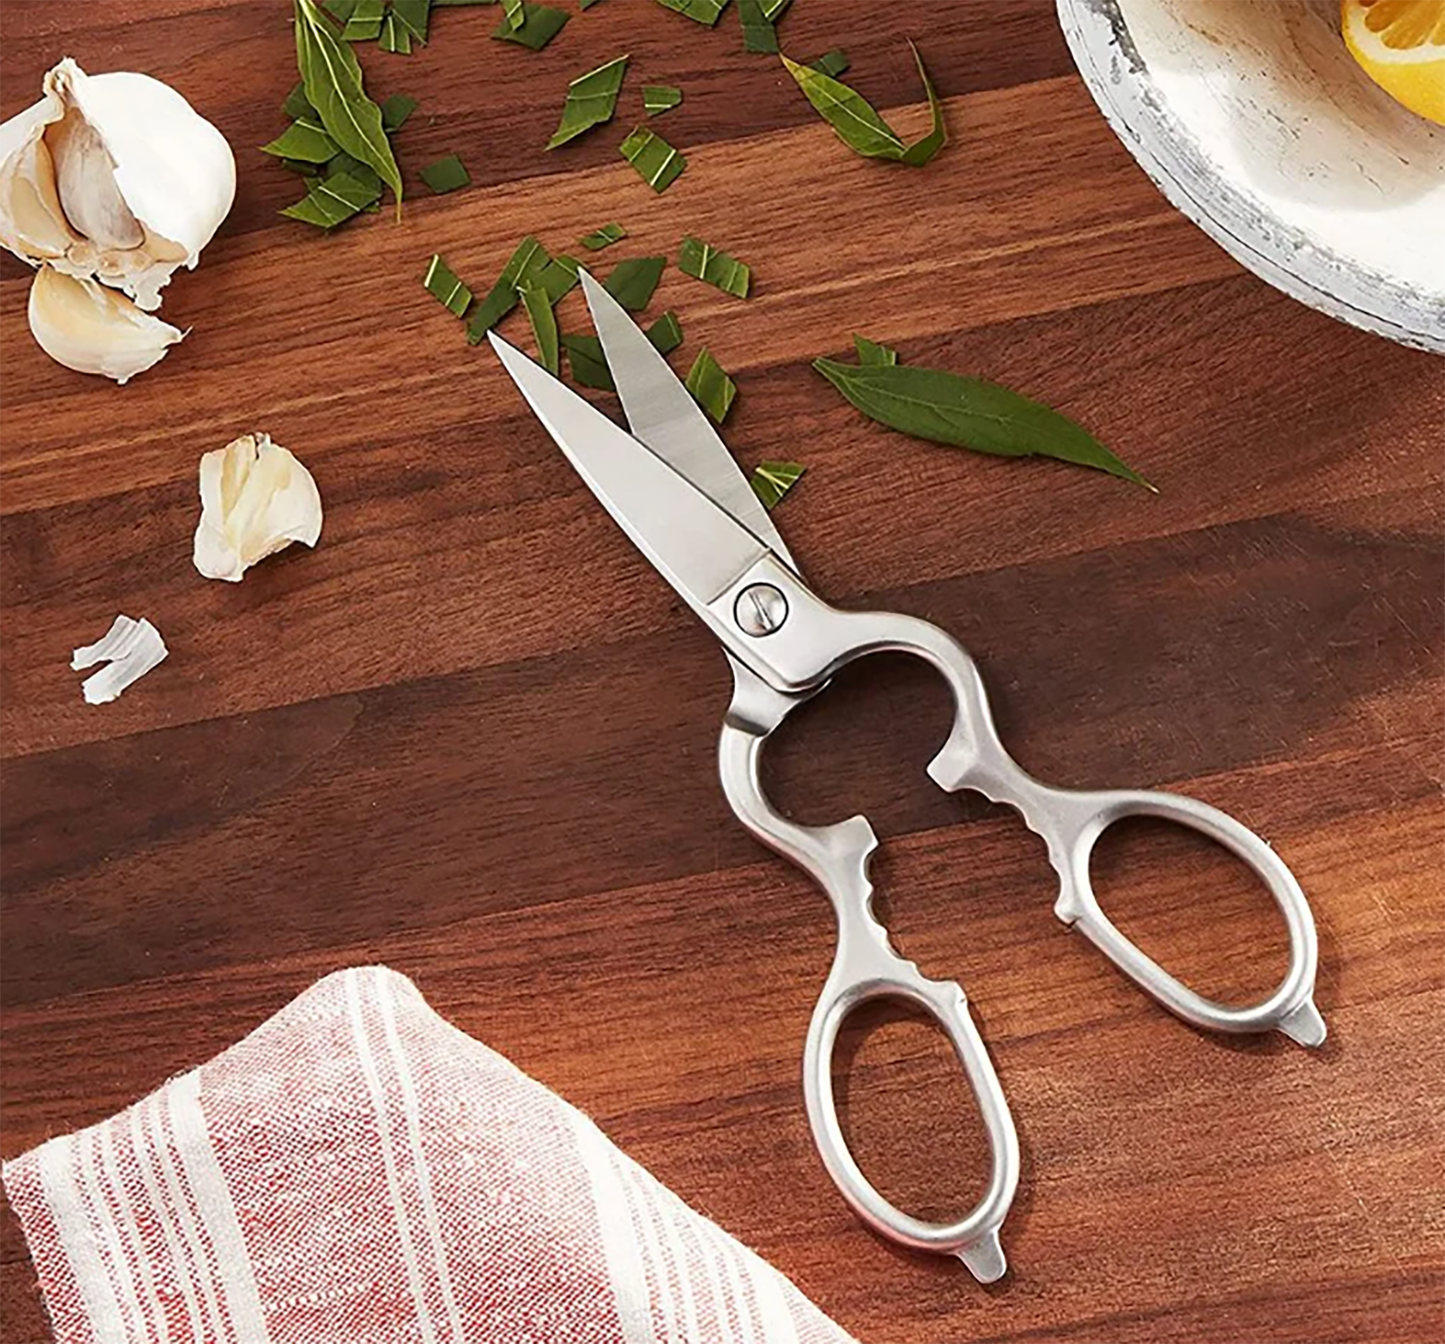 8 1/2" Come-Apart Kitchen Shears, Stainless-Steel